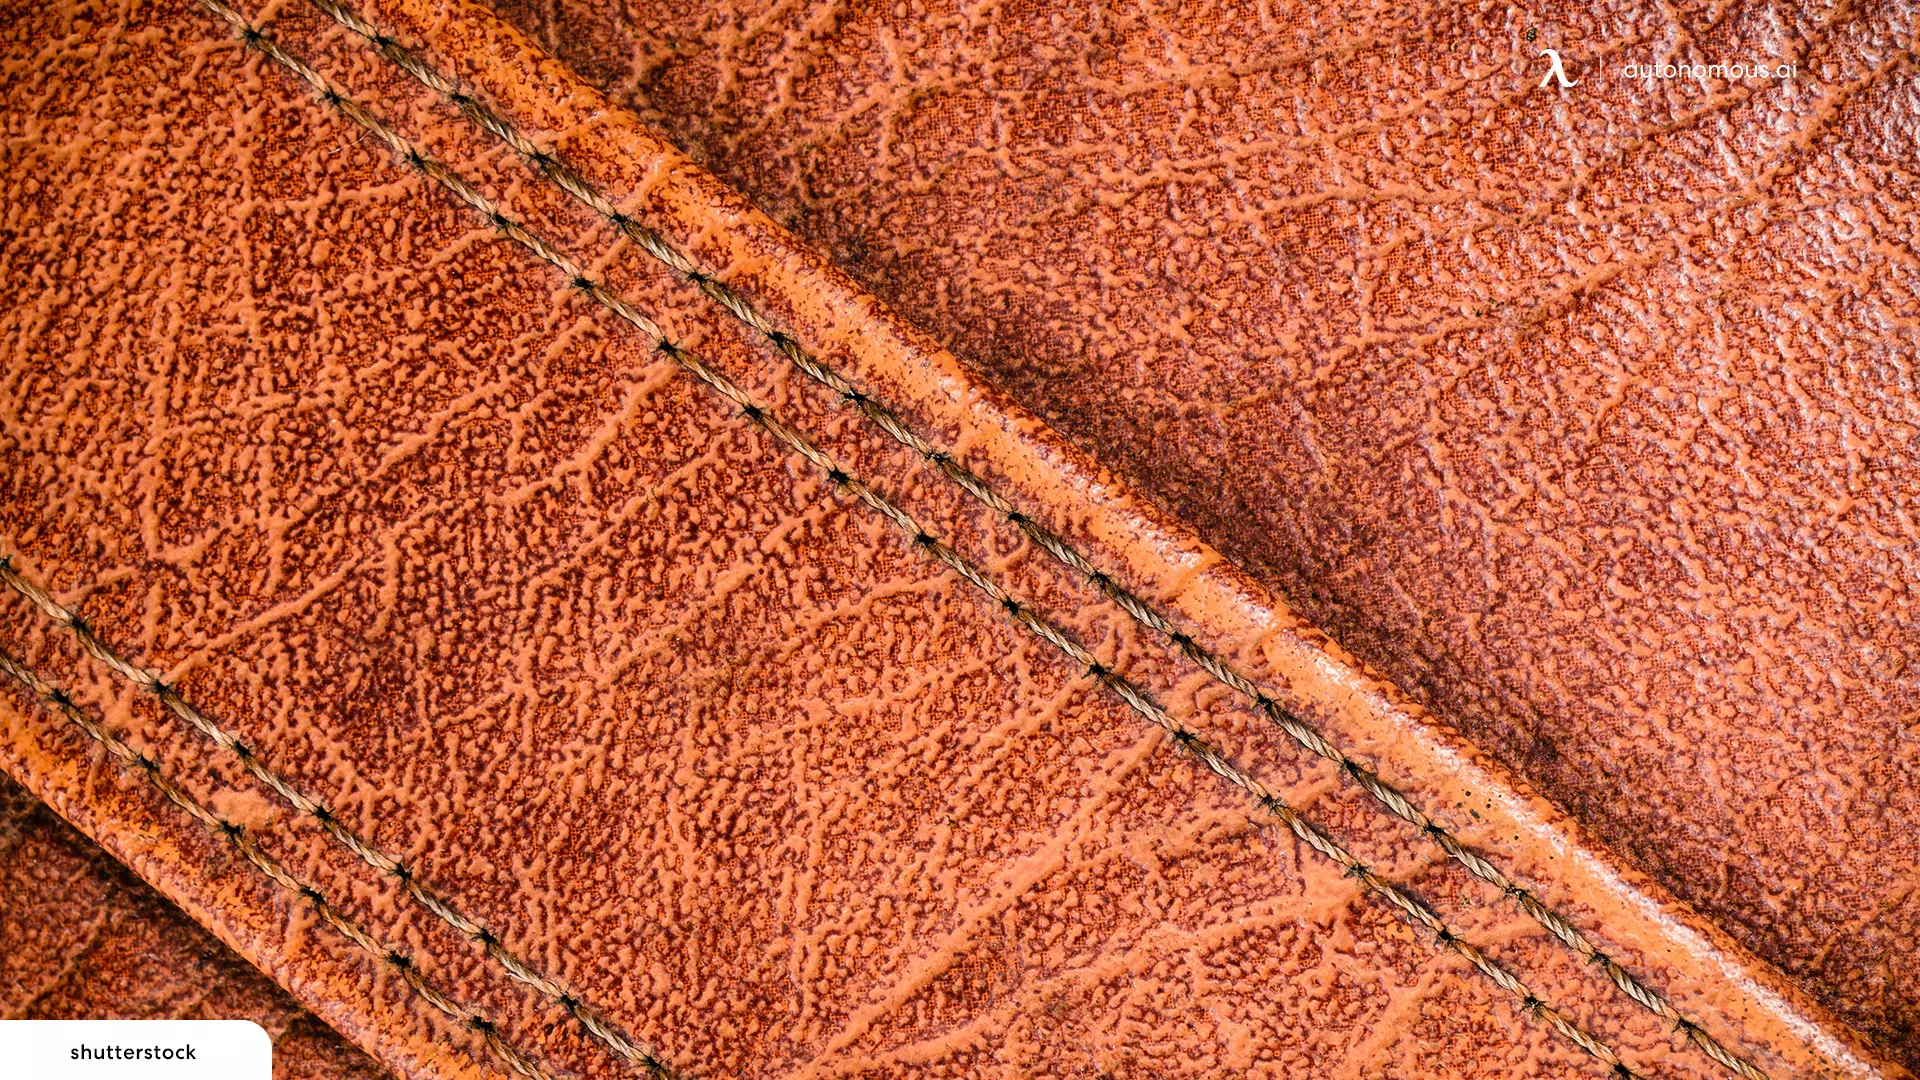 Differences Between Bonded Leather and Other Types of Leather